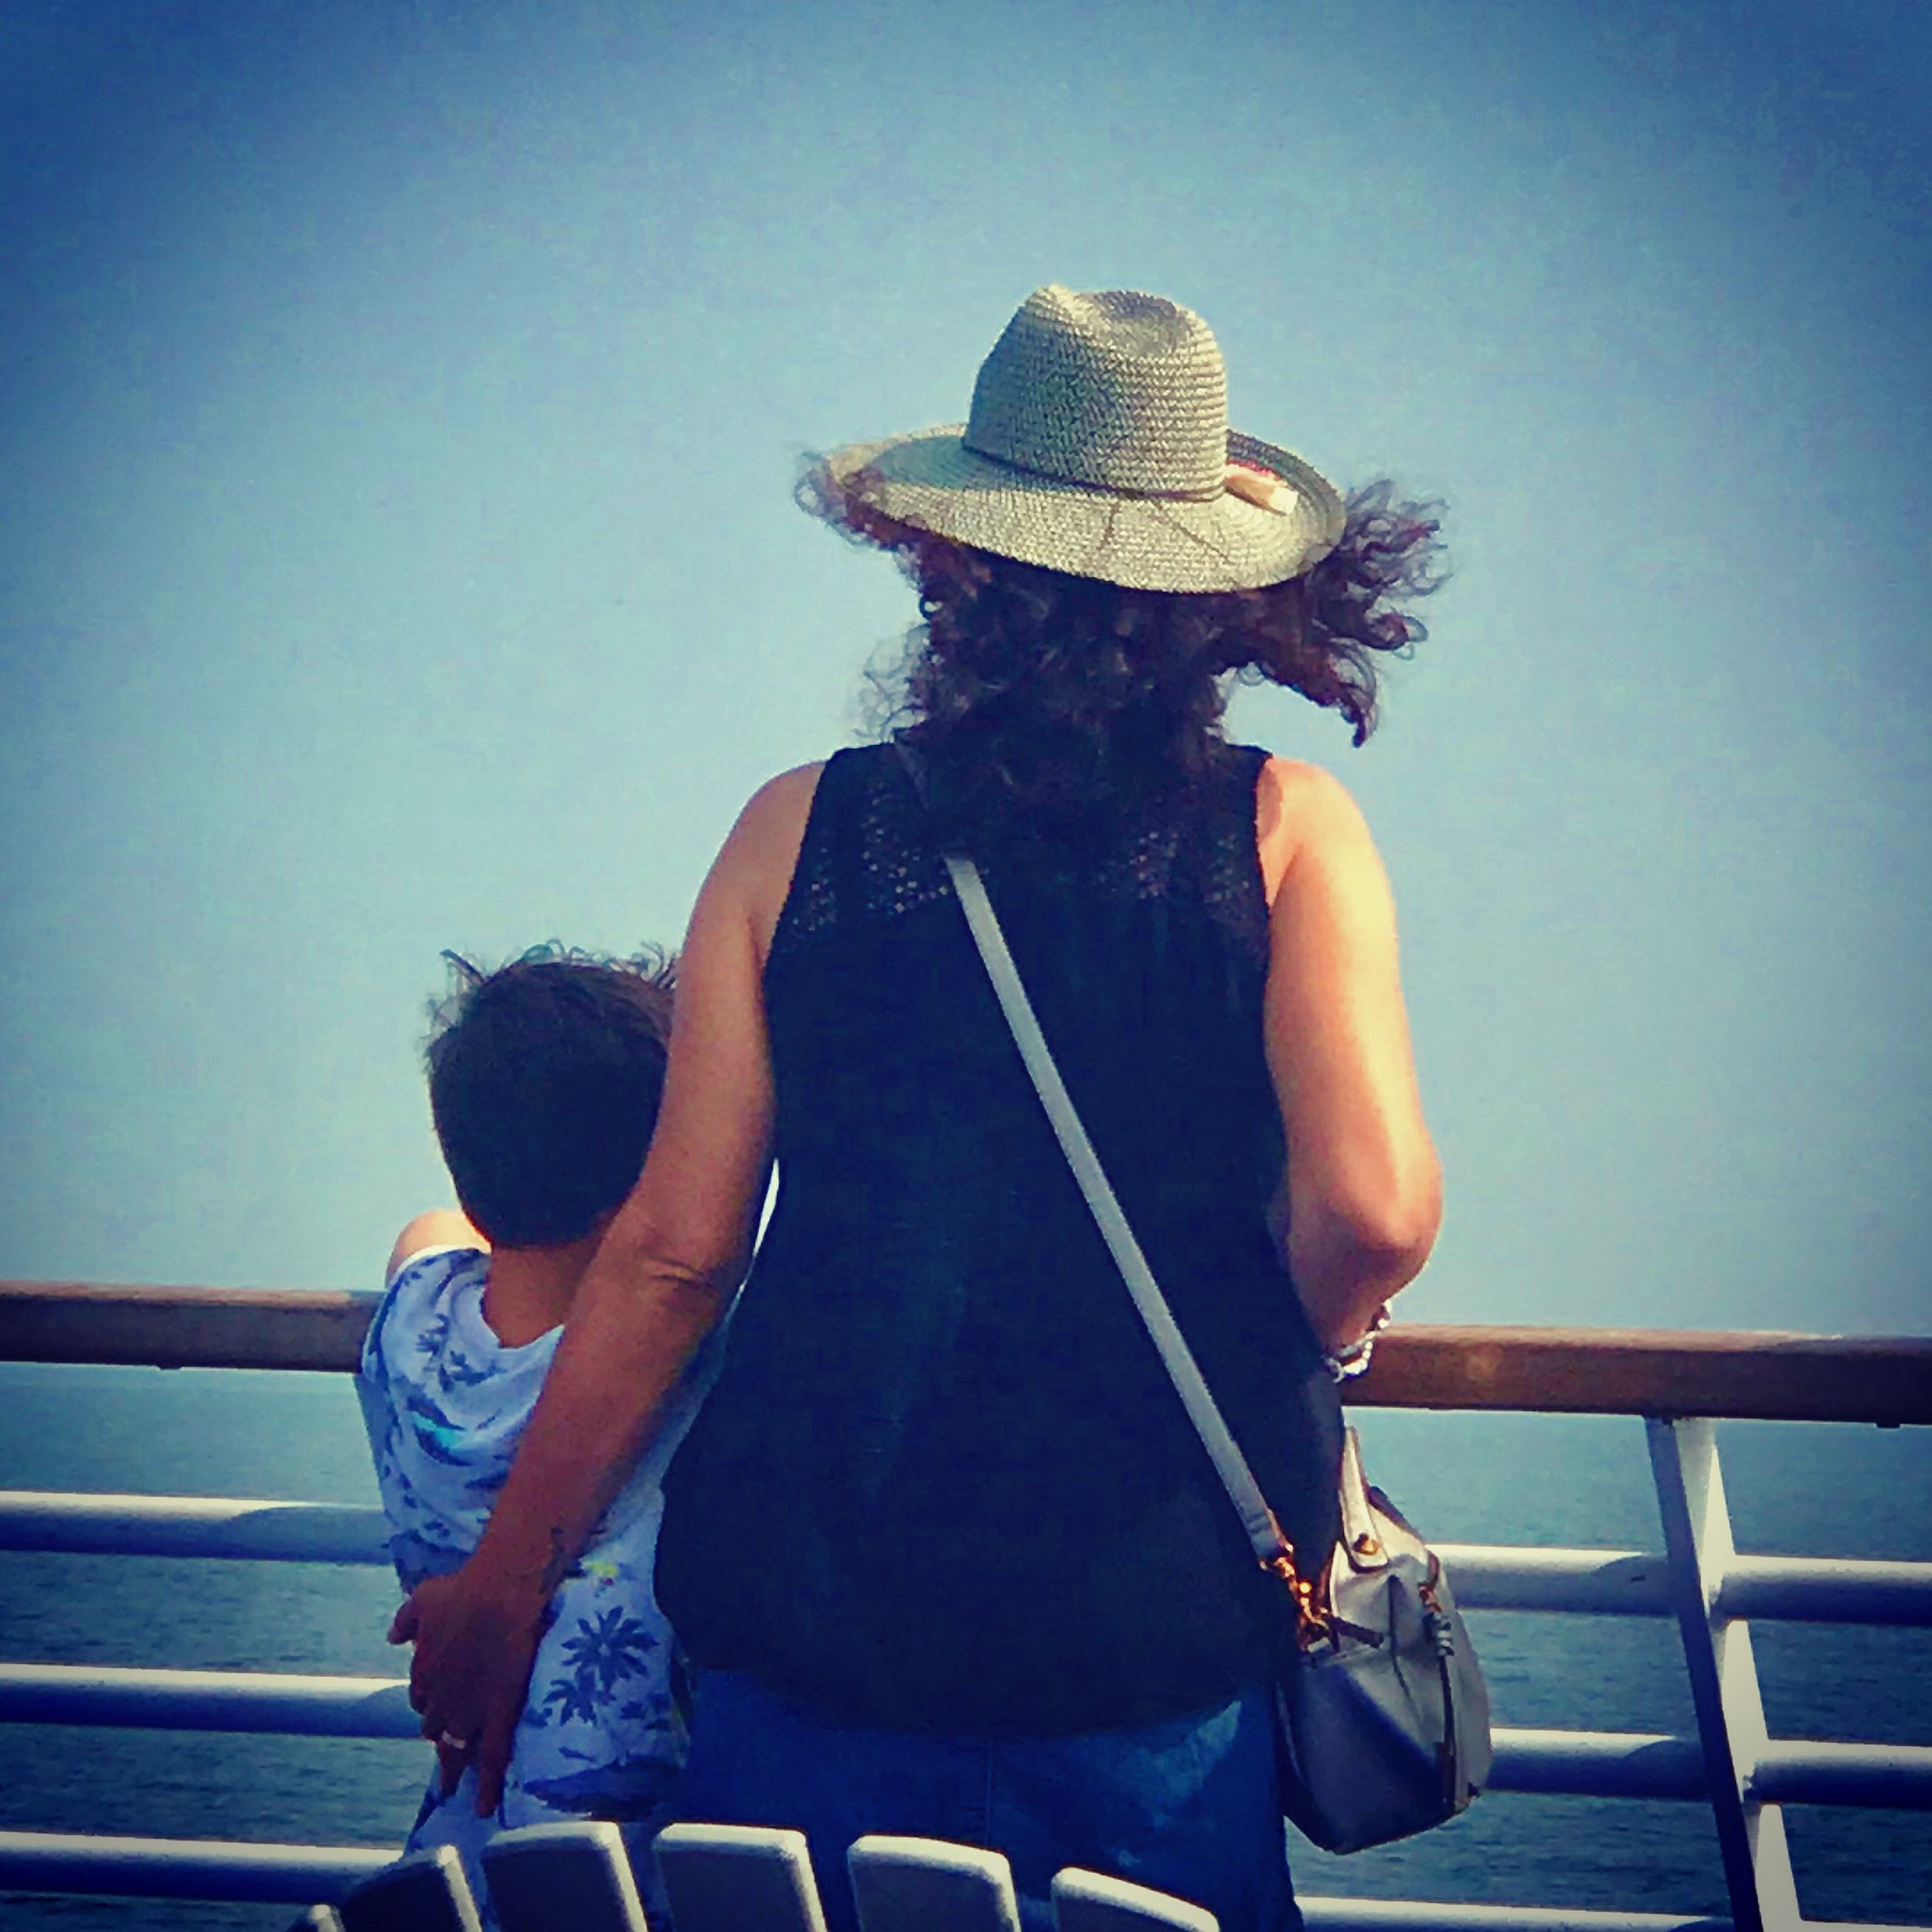 Wendy and her youngest, Noah, on the ferry.